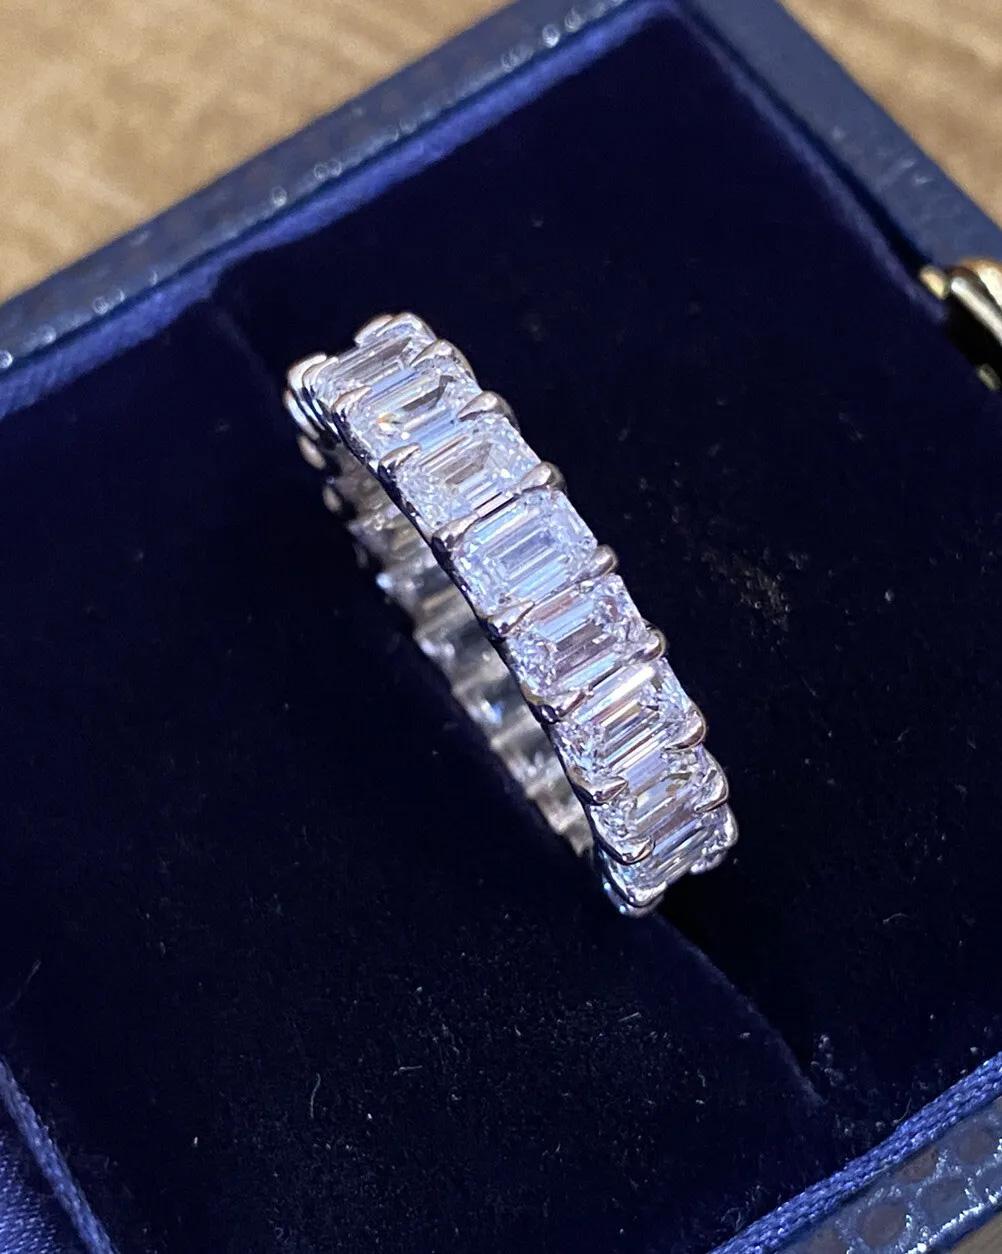 Emerald Cut Diamond Eternity Band Ring 5.12 Carat Total Weight in Platinum.

Diamond Eternity Band Ring features 21 Emerald cut Diamonds, averaging 0.24 carat each, set in Shared Basket Prong Setting in Platinum.

Total diamond weight is 5.12